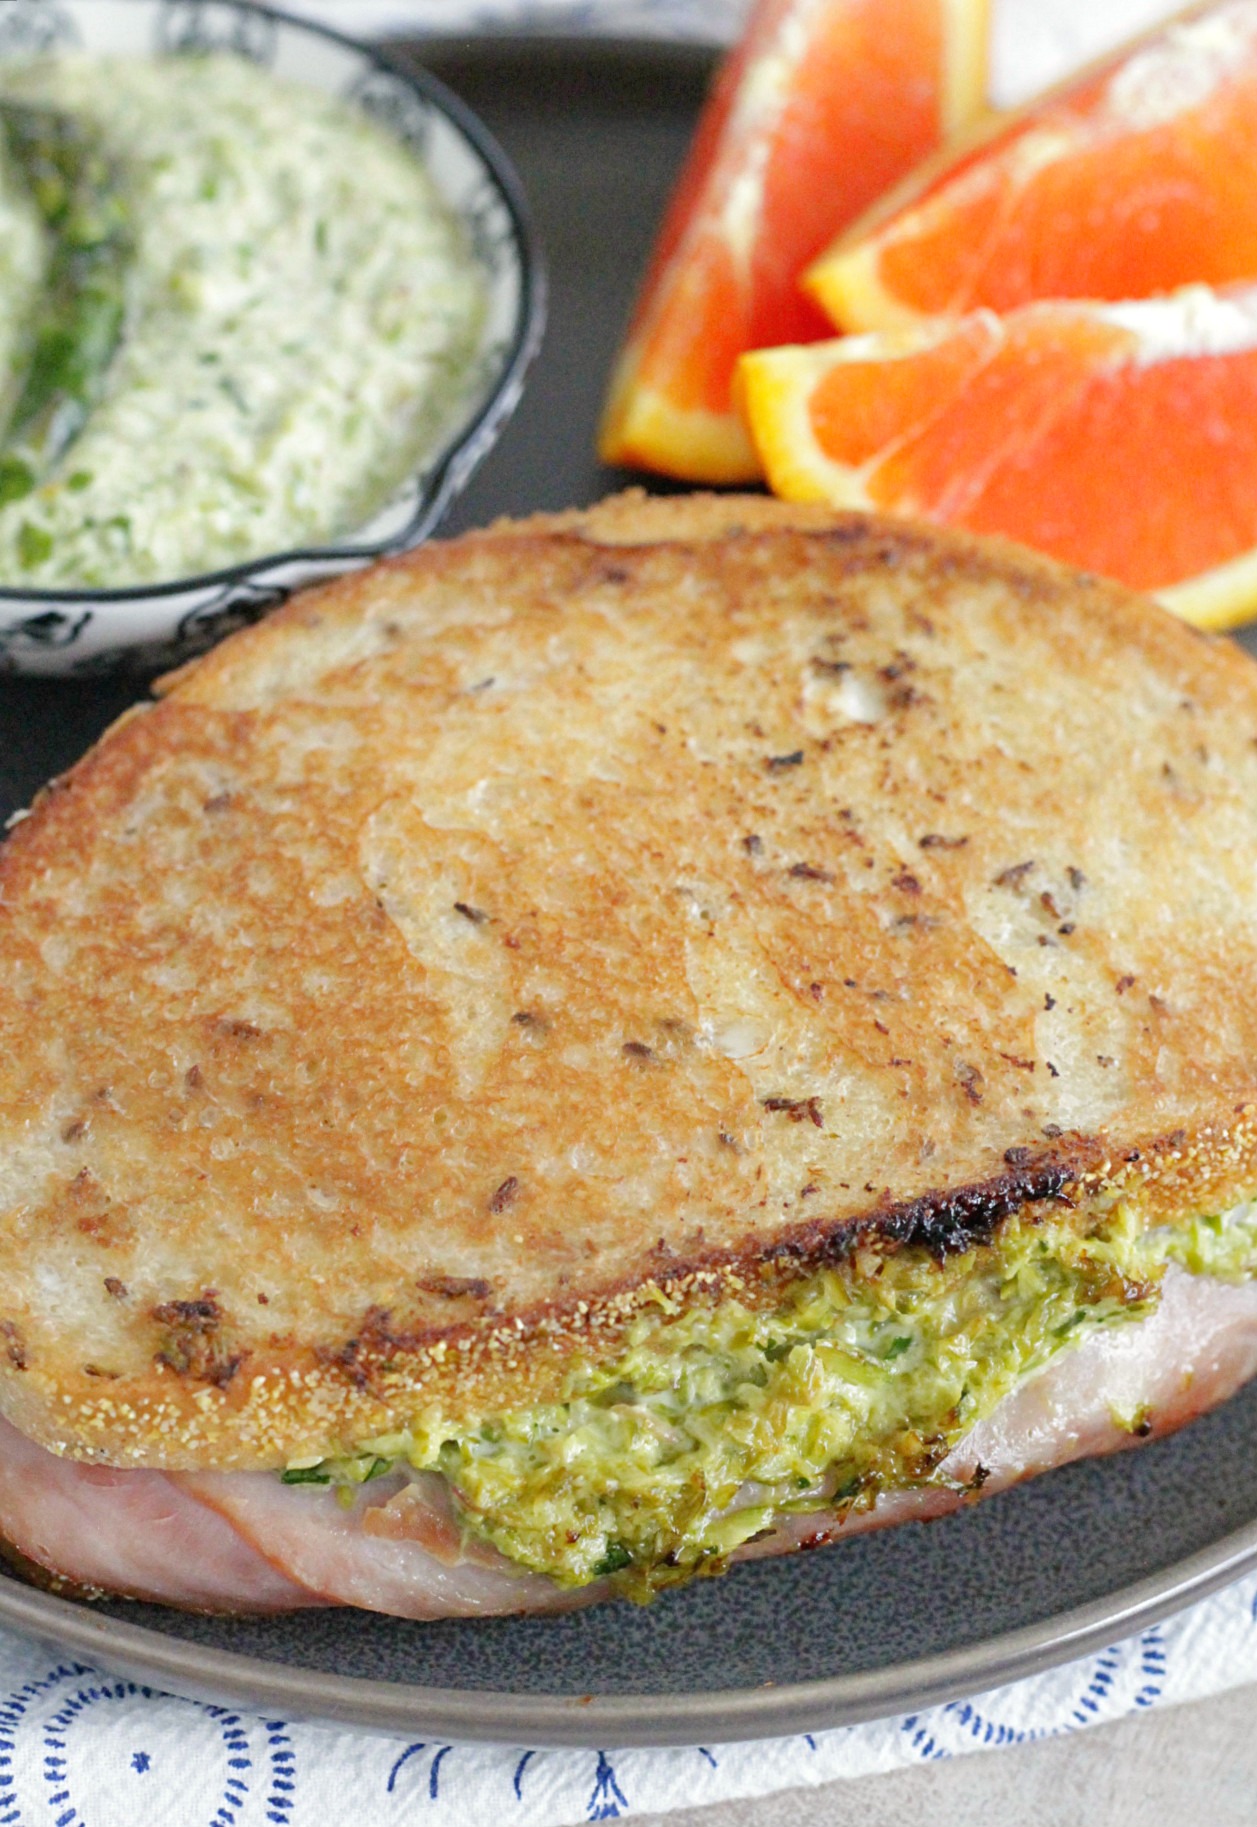 top view of whole grilled ham and cheese sandwich with asparagus mayonnaise on plate with orange slices